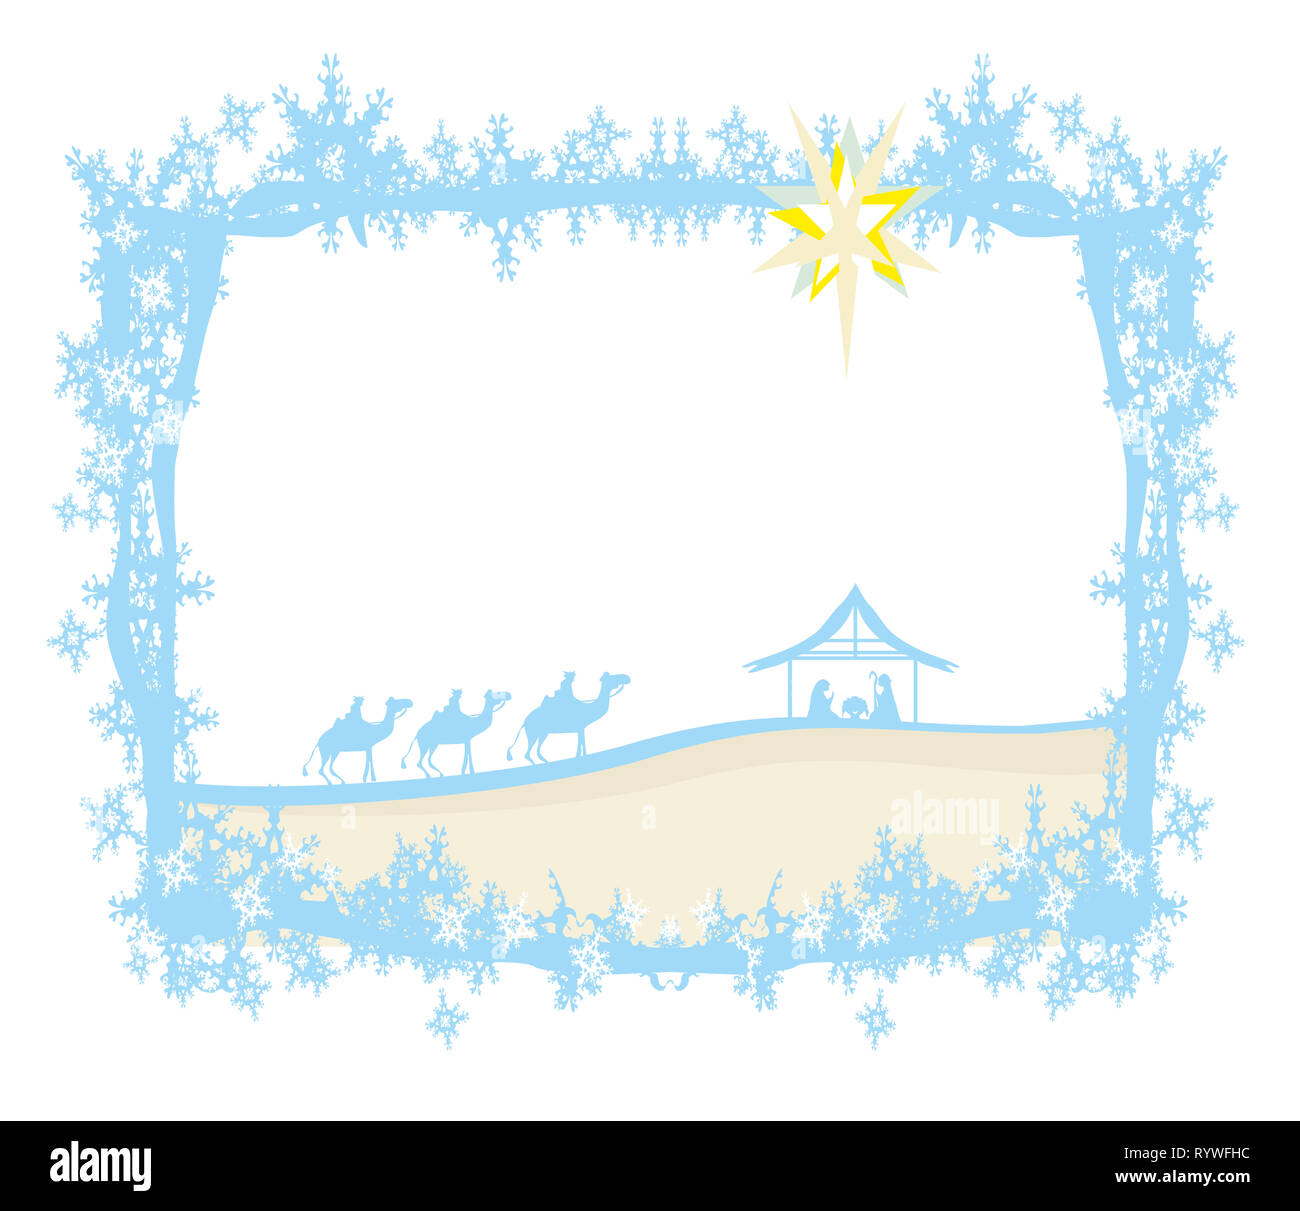 birth of Jesus in Bethlehem - abstract frame Stock Photo